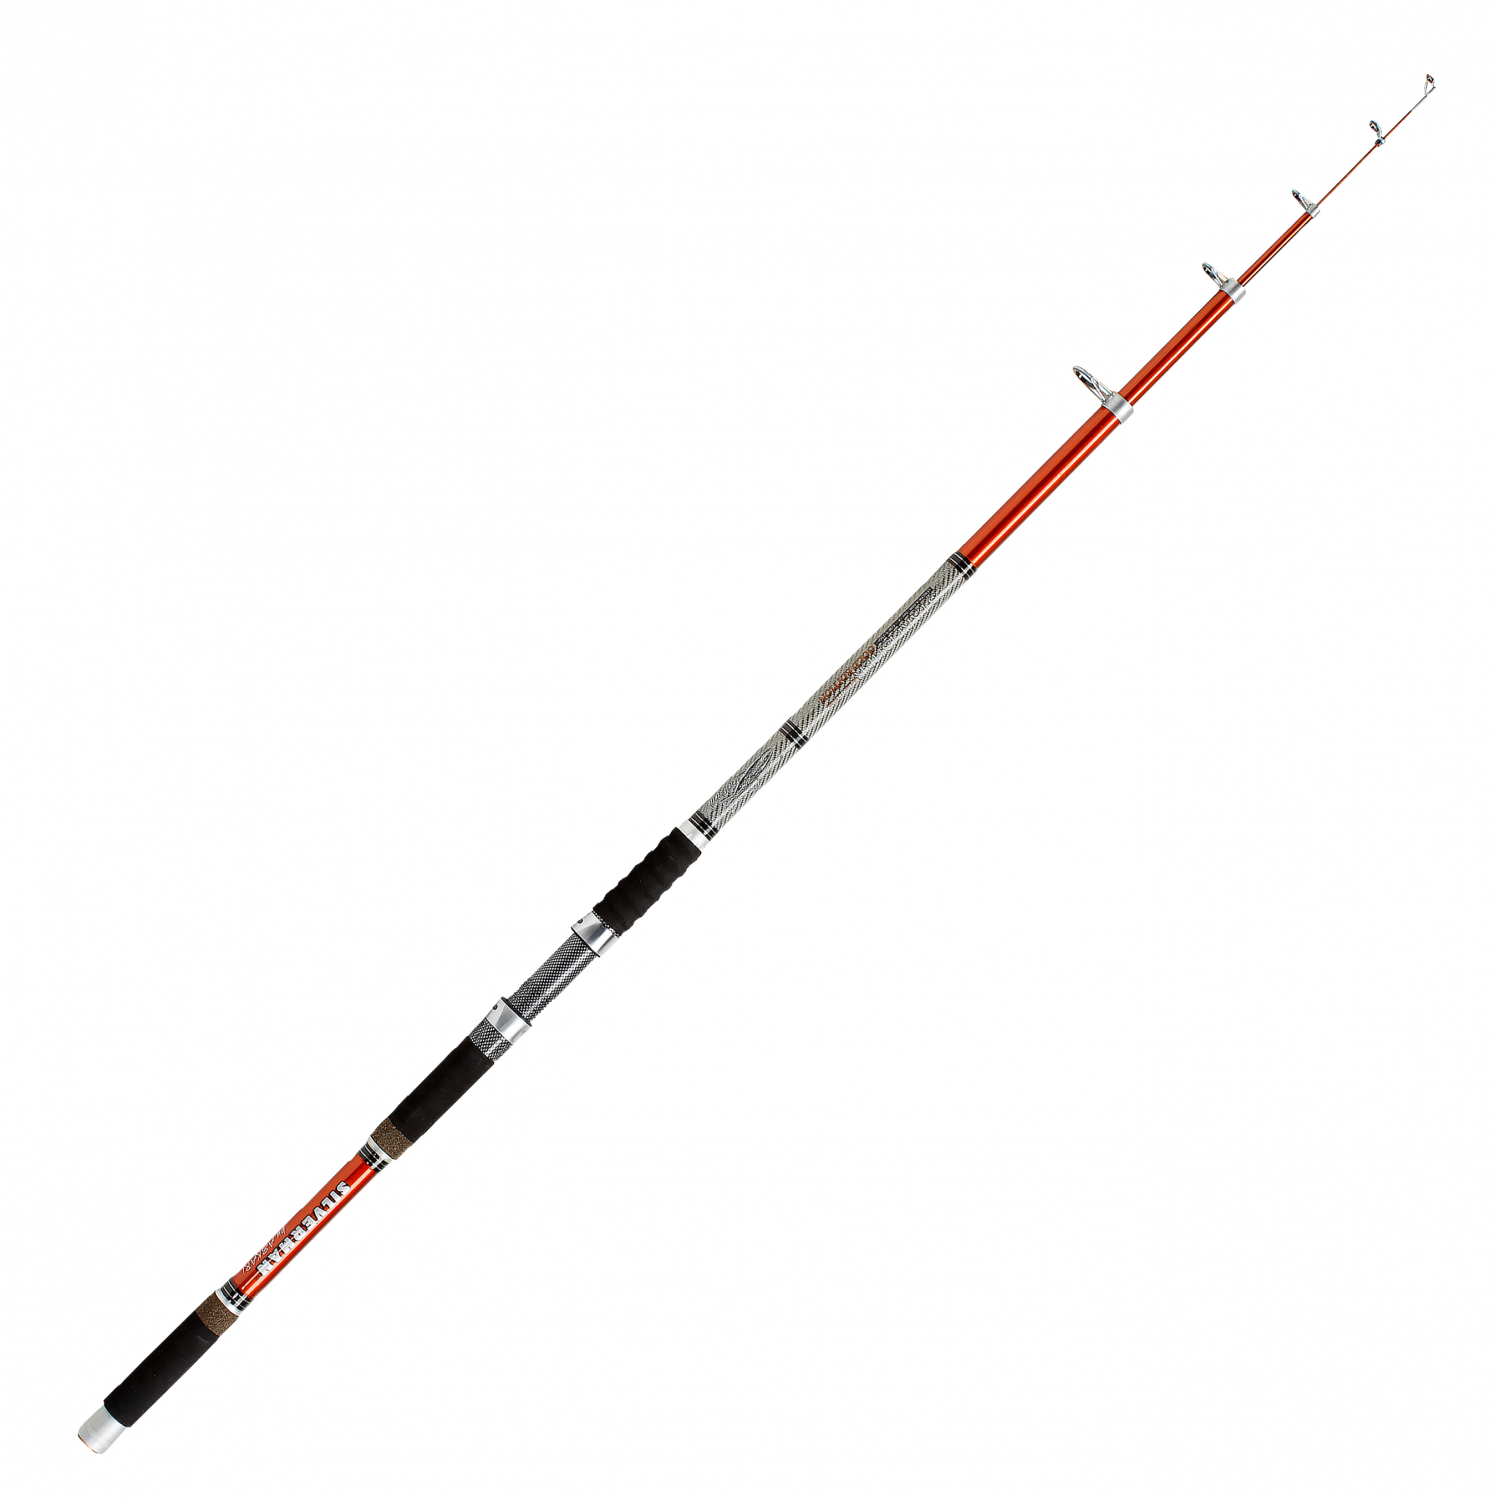 Silverman Trout Fishing Rod Starfisher GE Tele at low prices